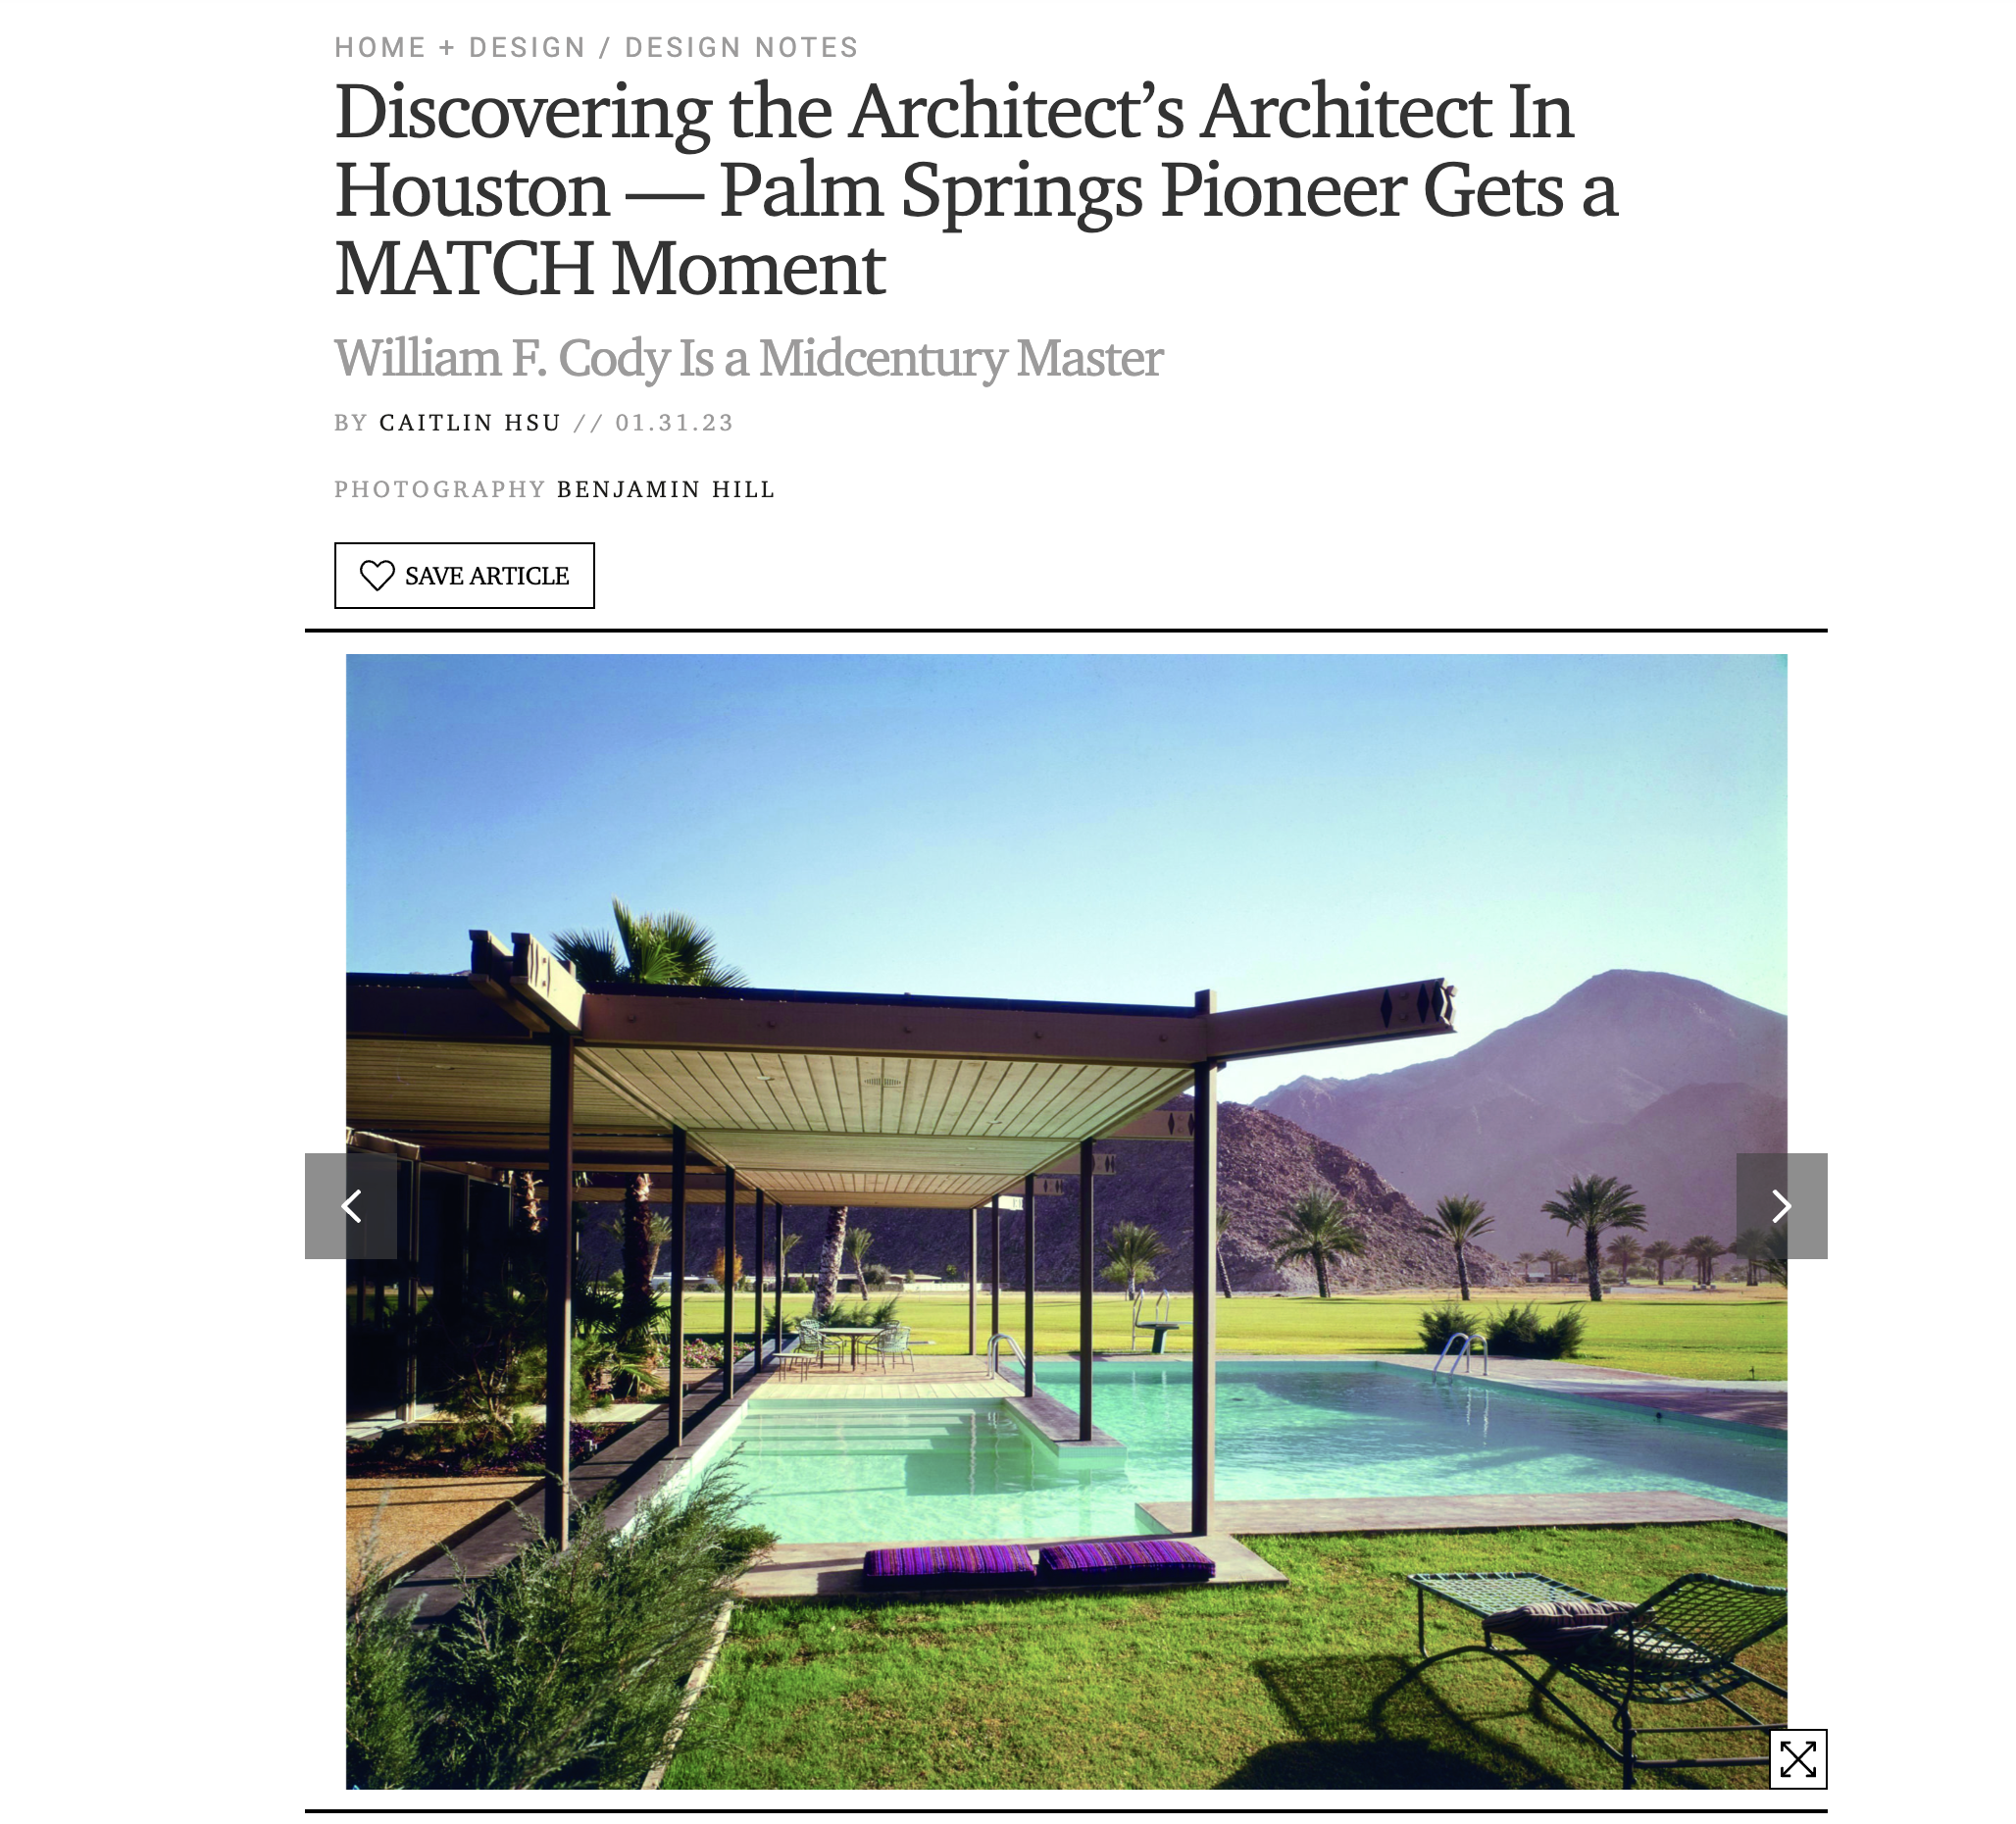 Paper City – Discovering the Architect's Architect in Houston